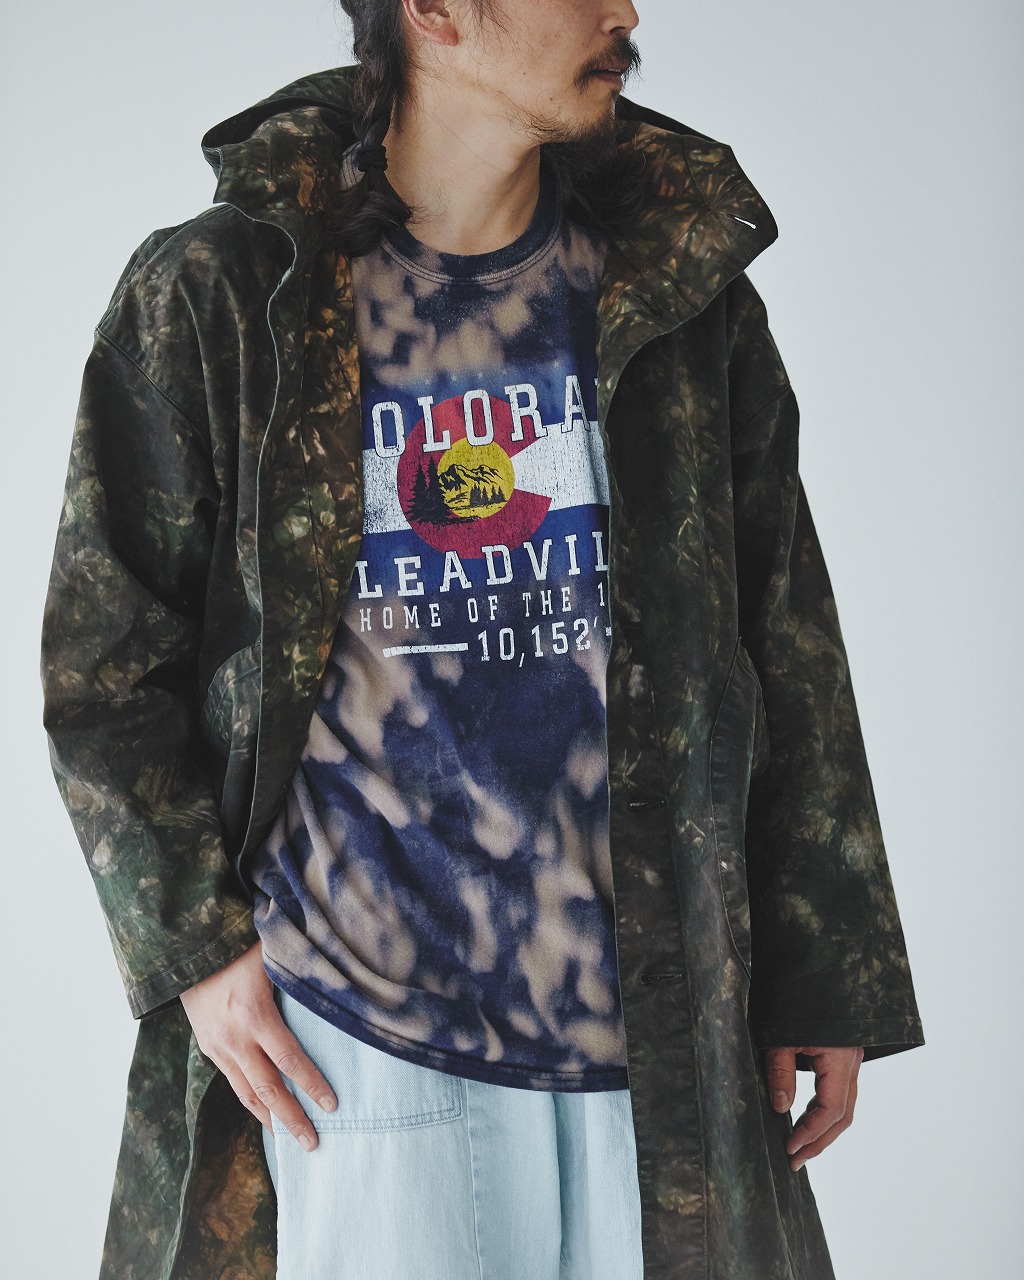 【2021 Autumn & Winter】rebear by Johnbull NEW COLLECTION アイテム